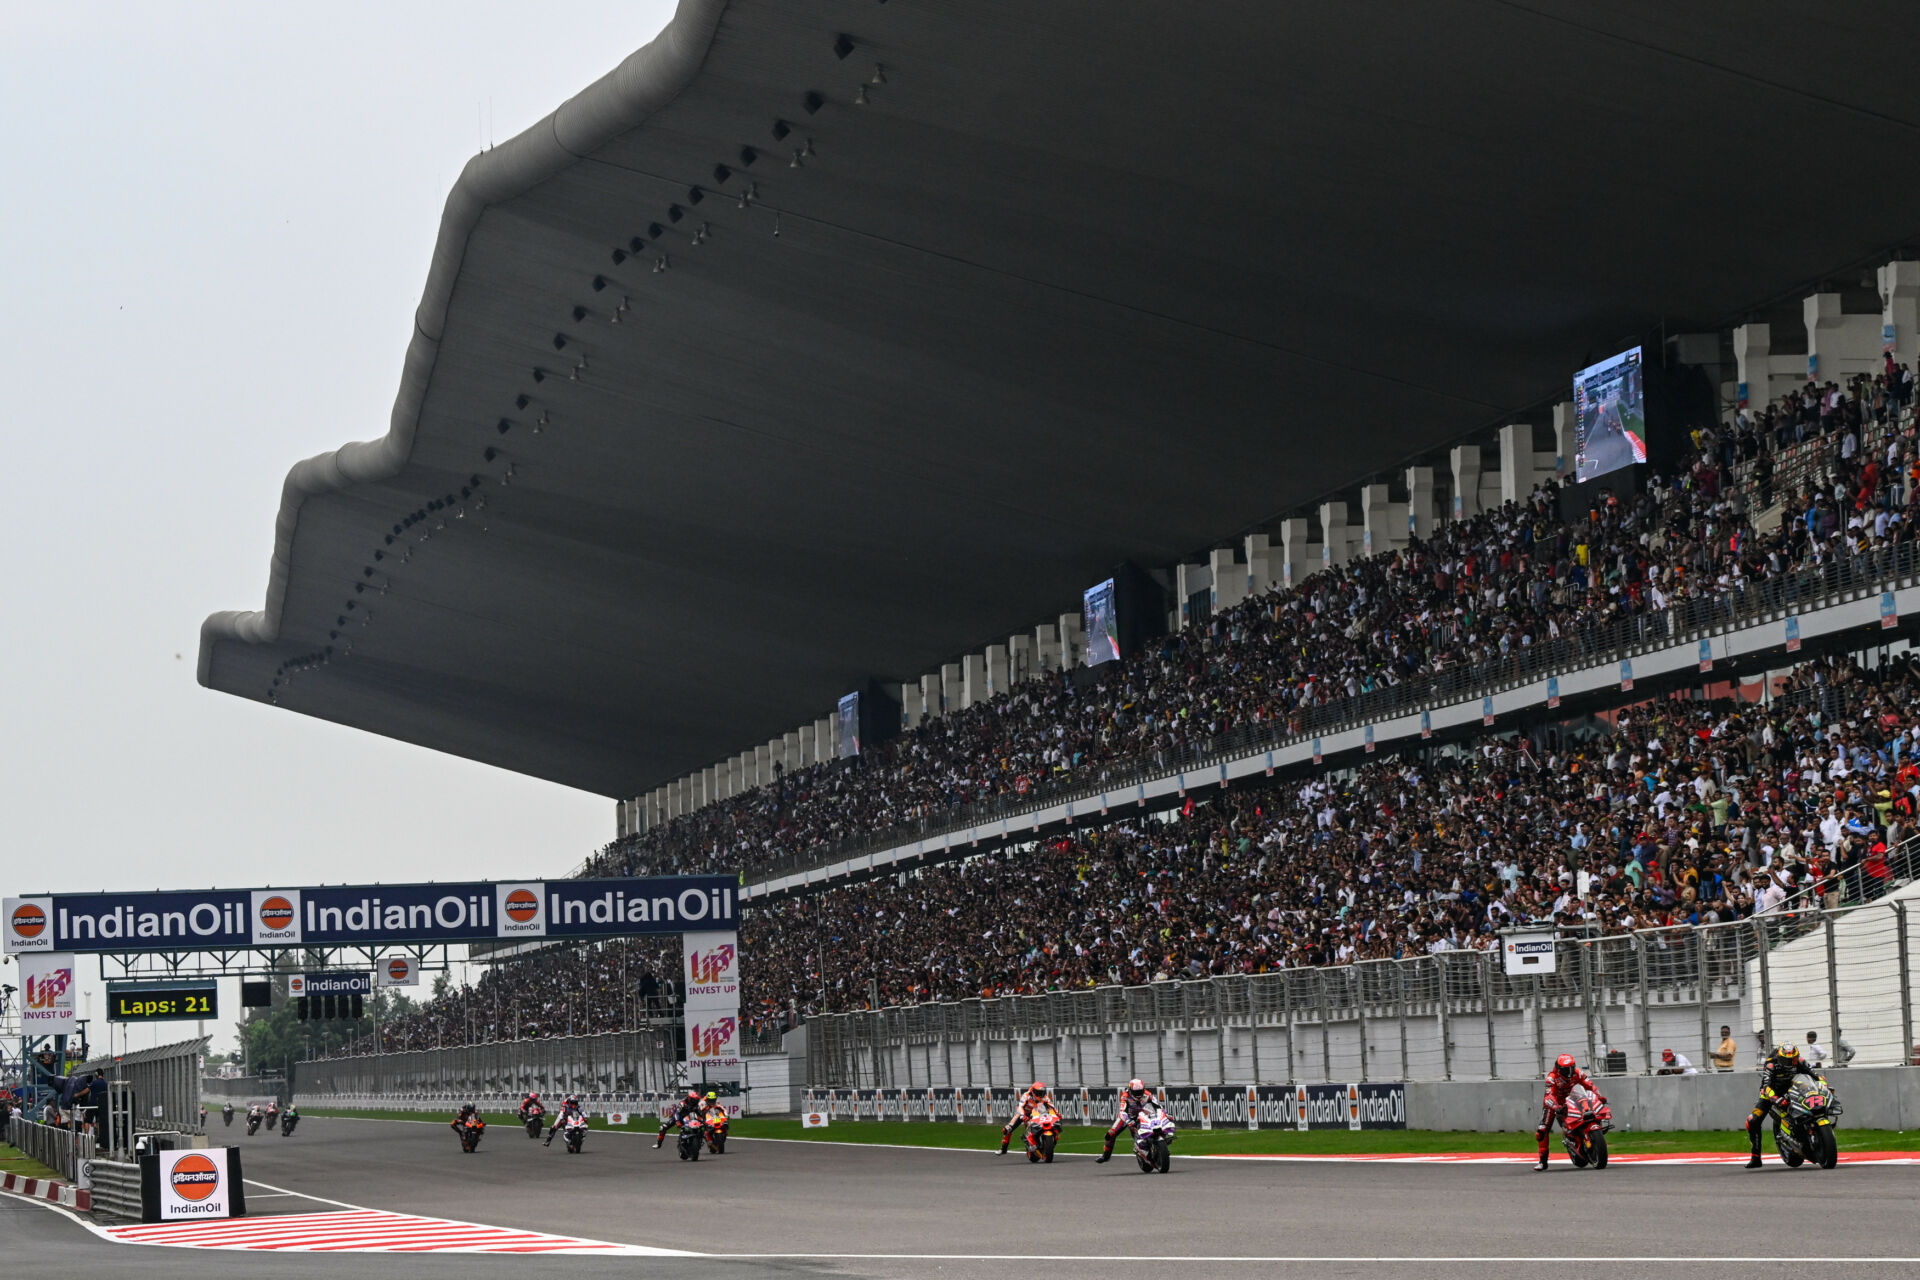 Marco Bezzecchi (72) leads early in the IndianOil Grand Prix of India MotoGP race. Photo courtesy Dorna.